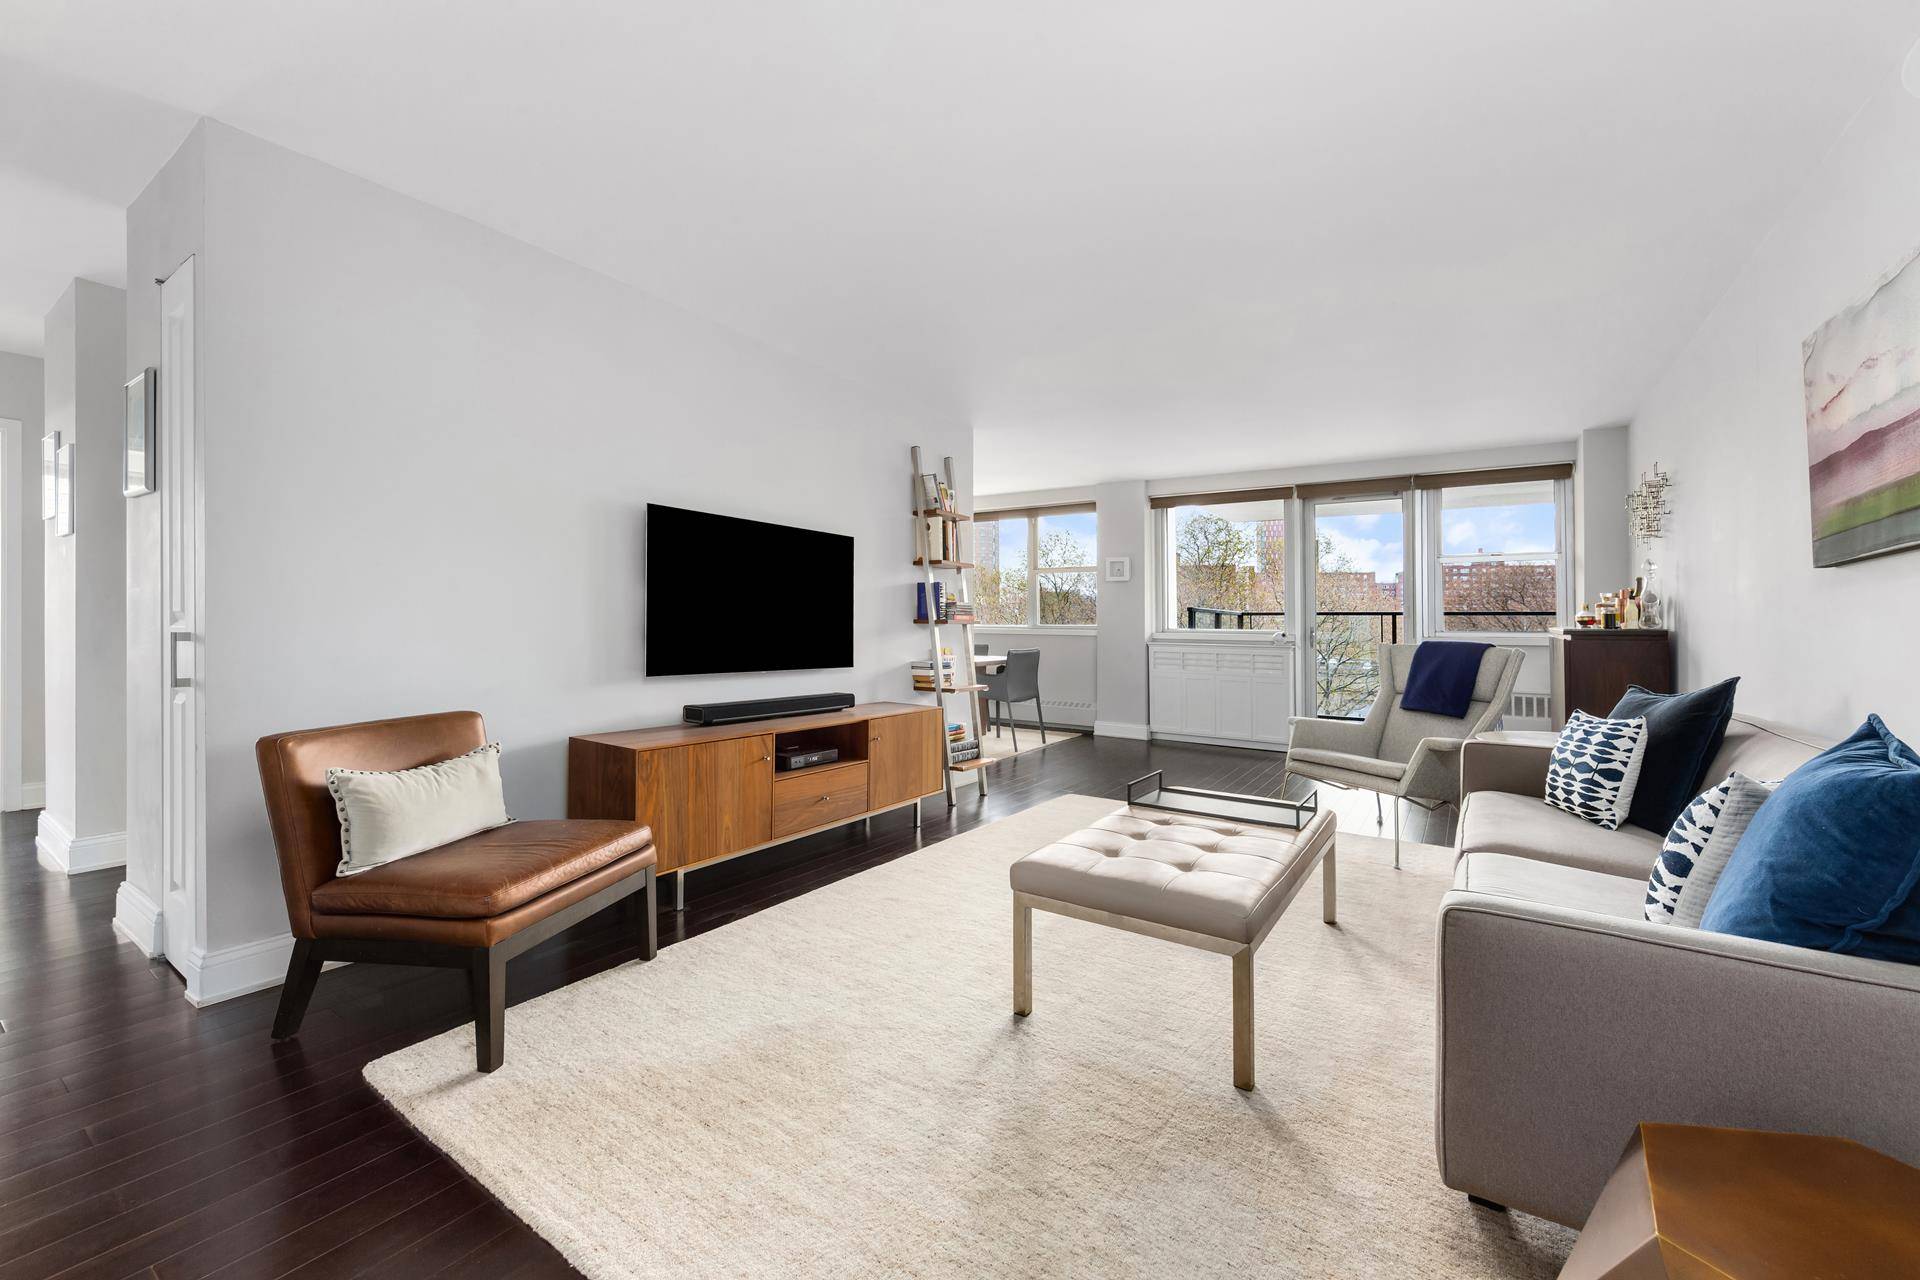 Bright and inviting, this beautifully appointed 2 bedroom, 2 bathroom home in the heart of Brooklyn Heights boasts tree line views to the east and the Brooklyn Bridge and Empire ...